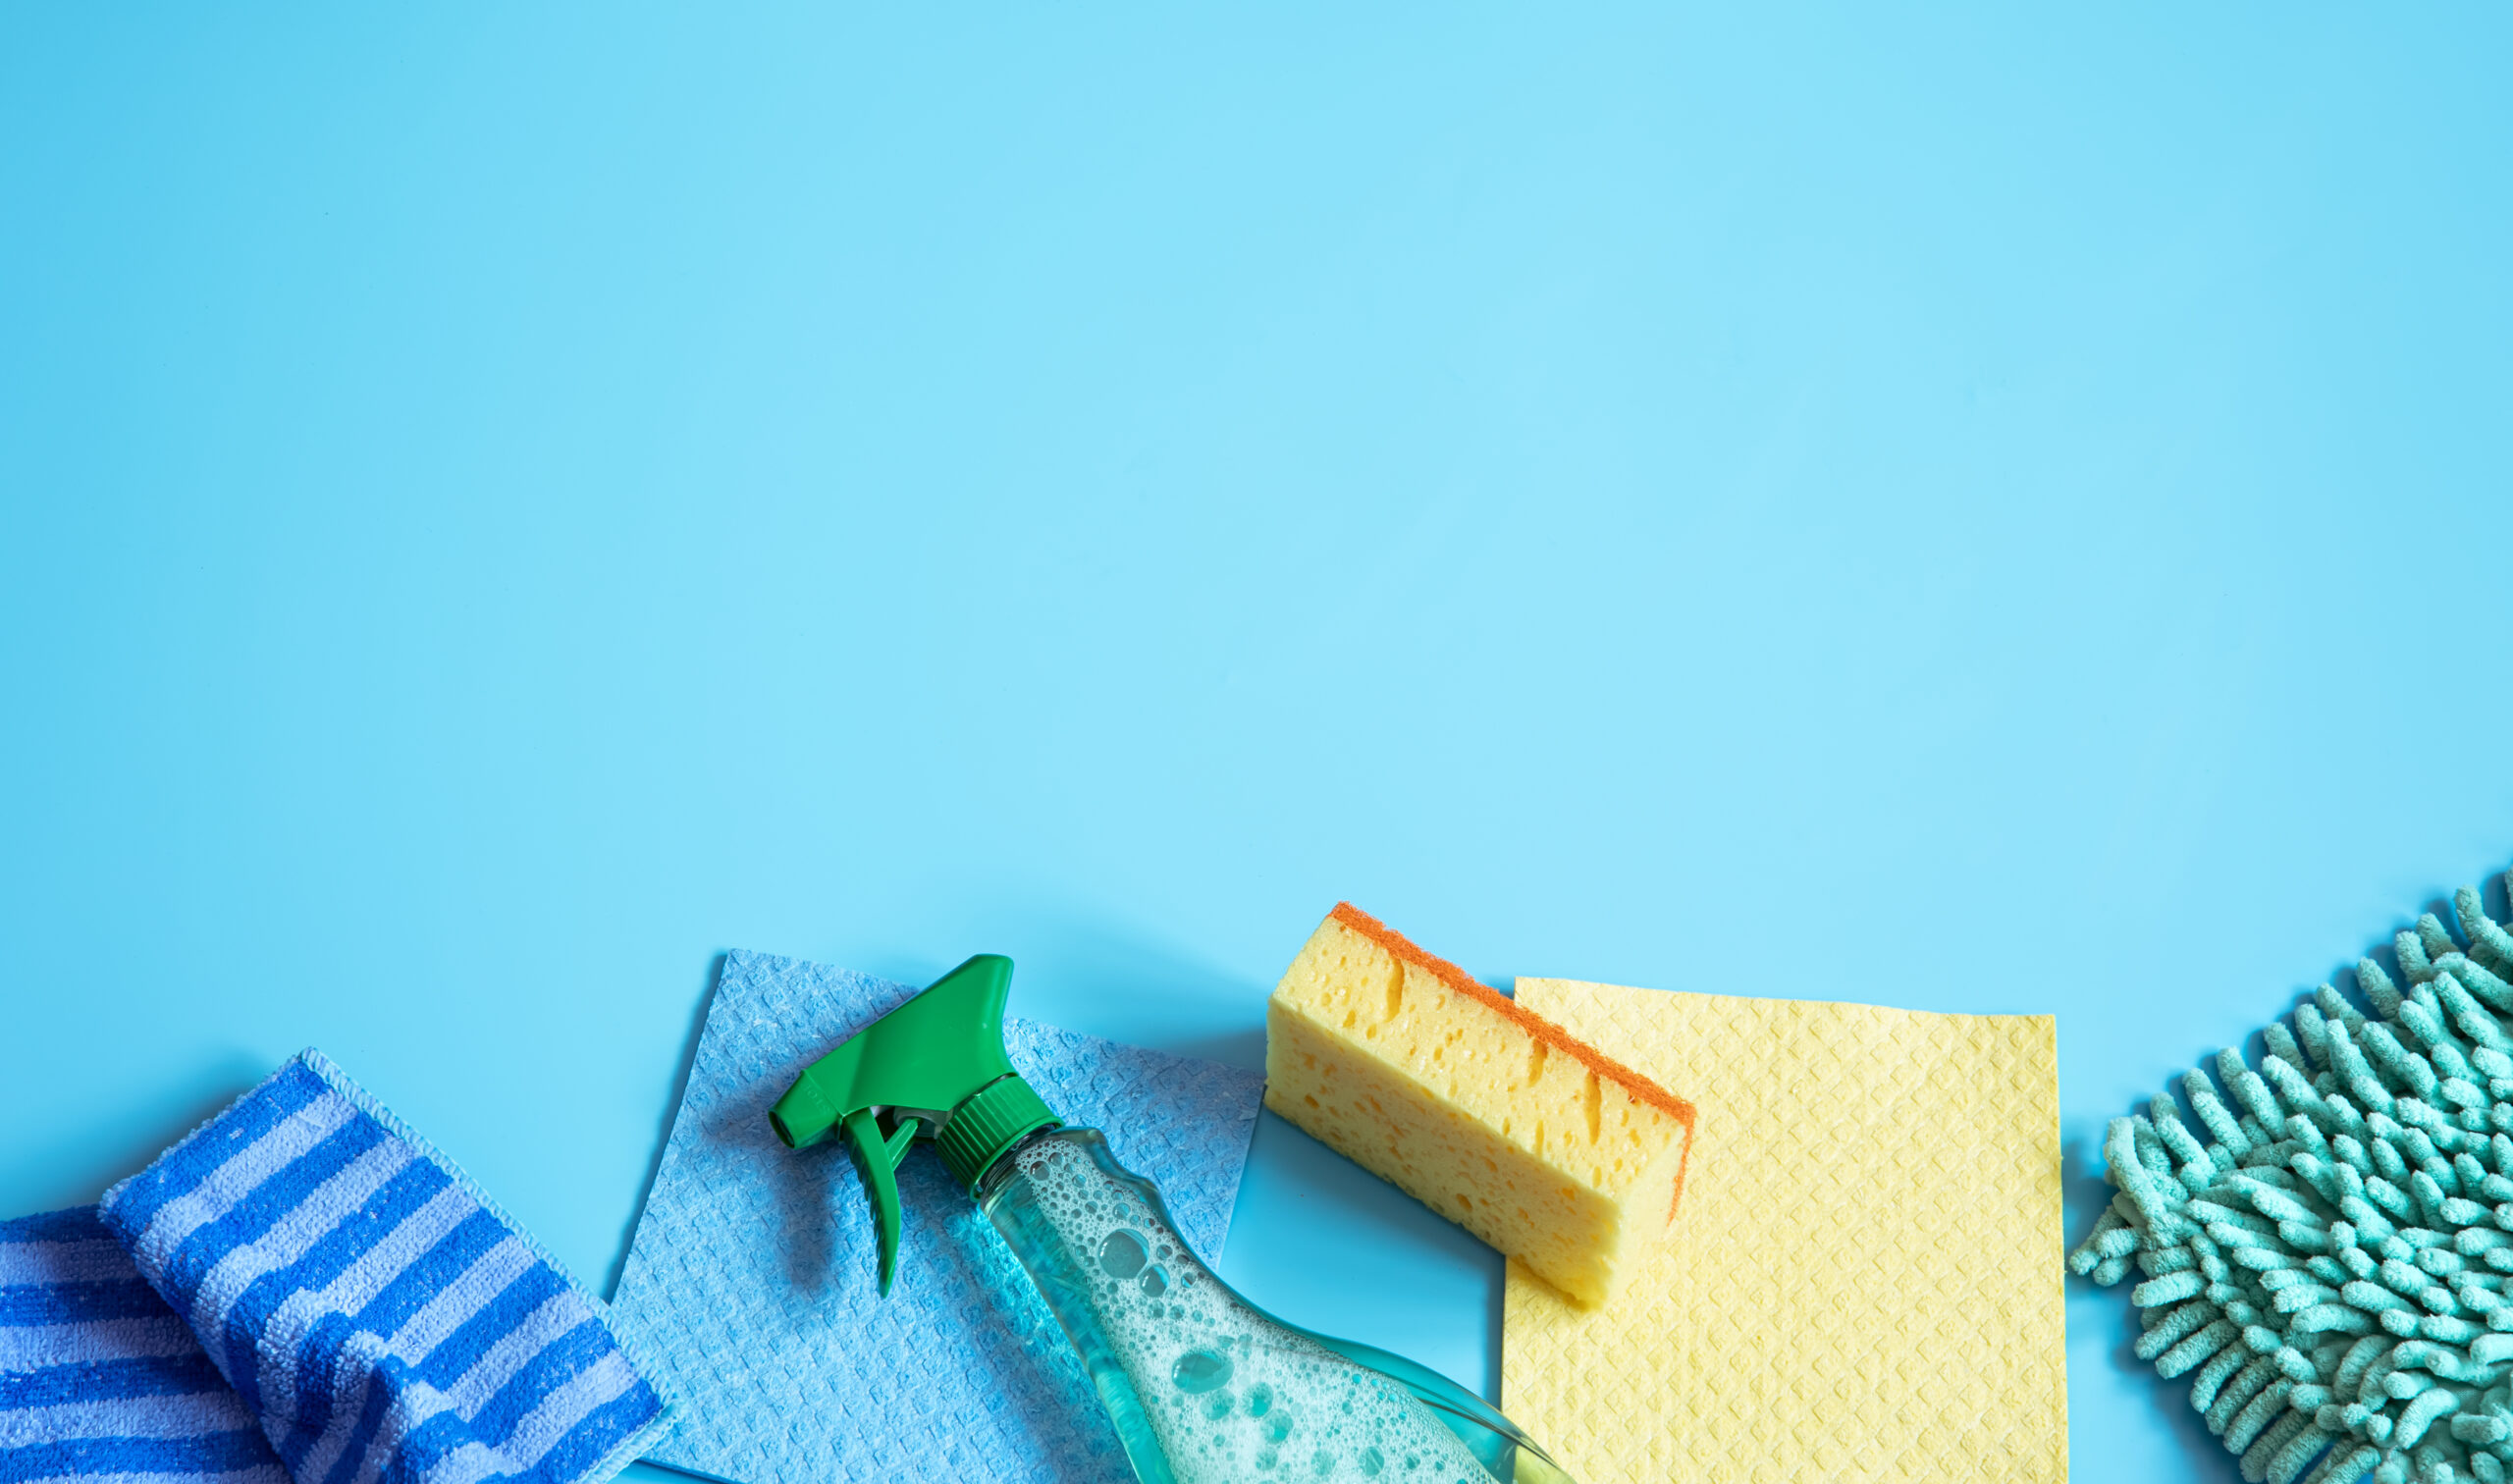 Colorful composition with sponges, rags, gloves and detergent for general cleaning. Cleaning service concept.